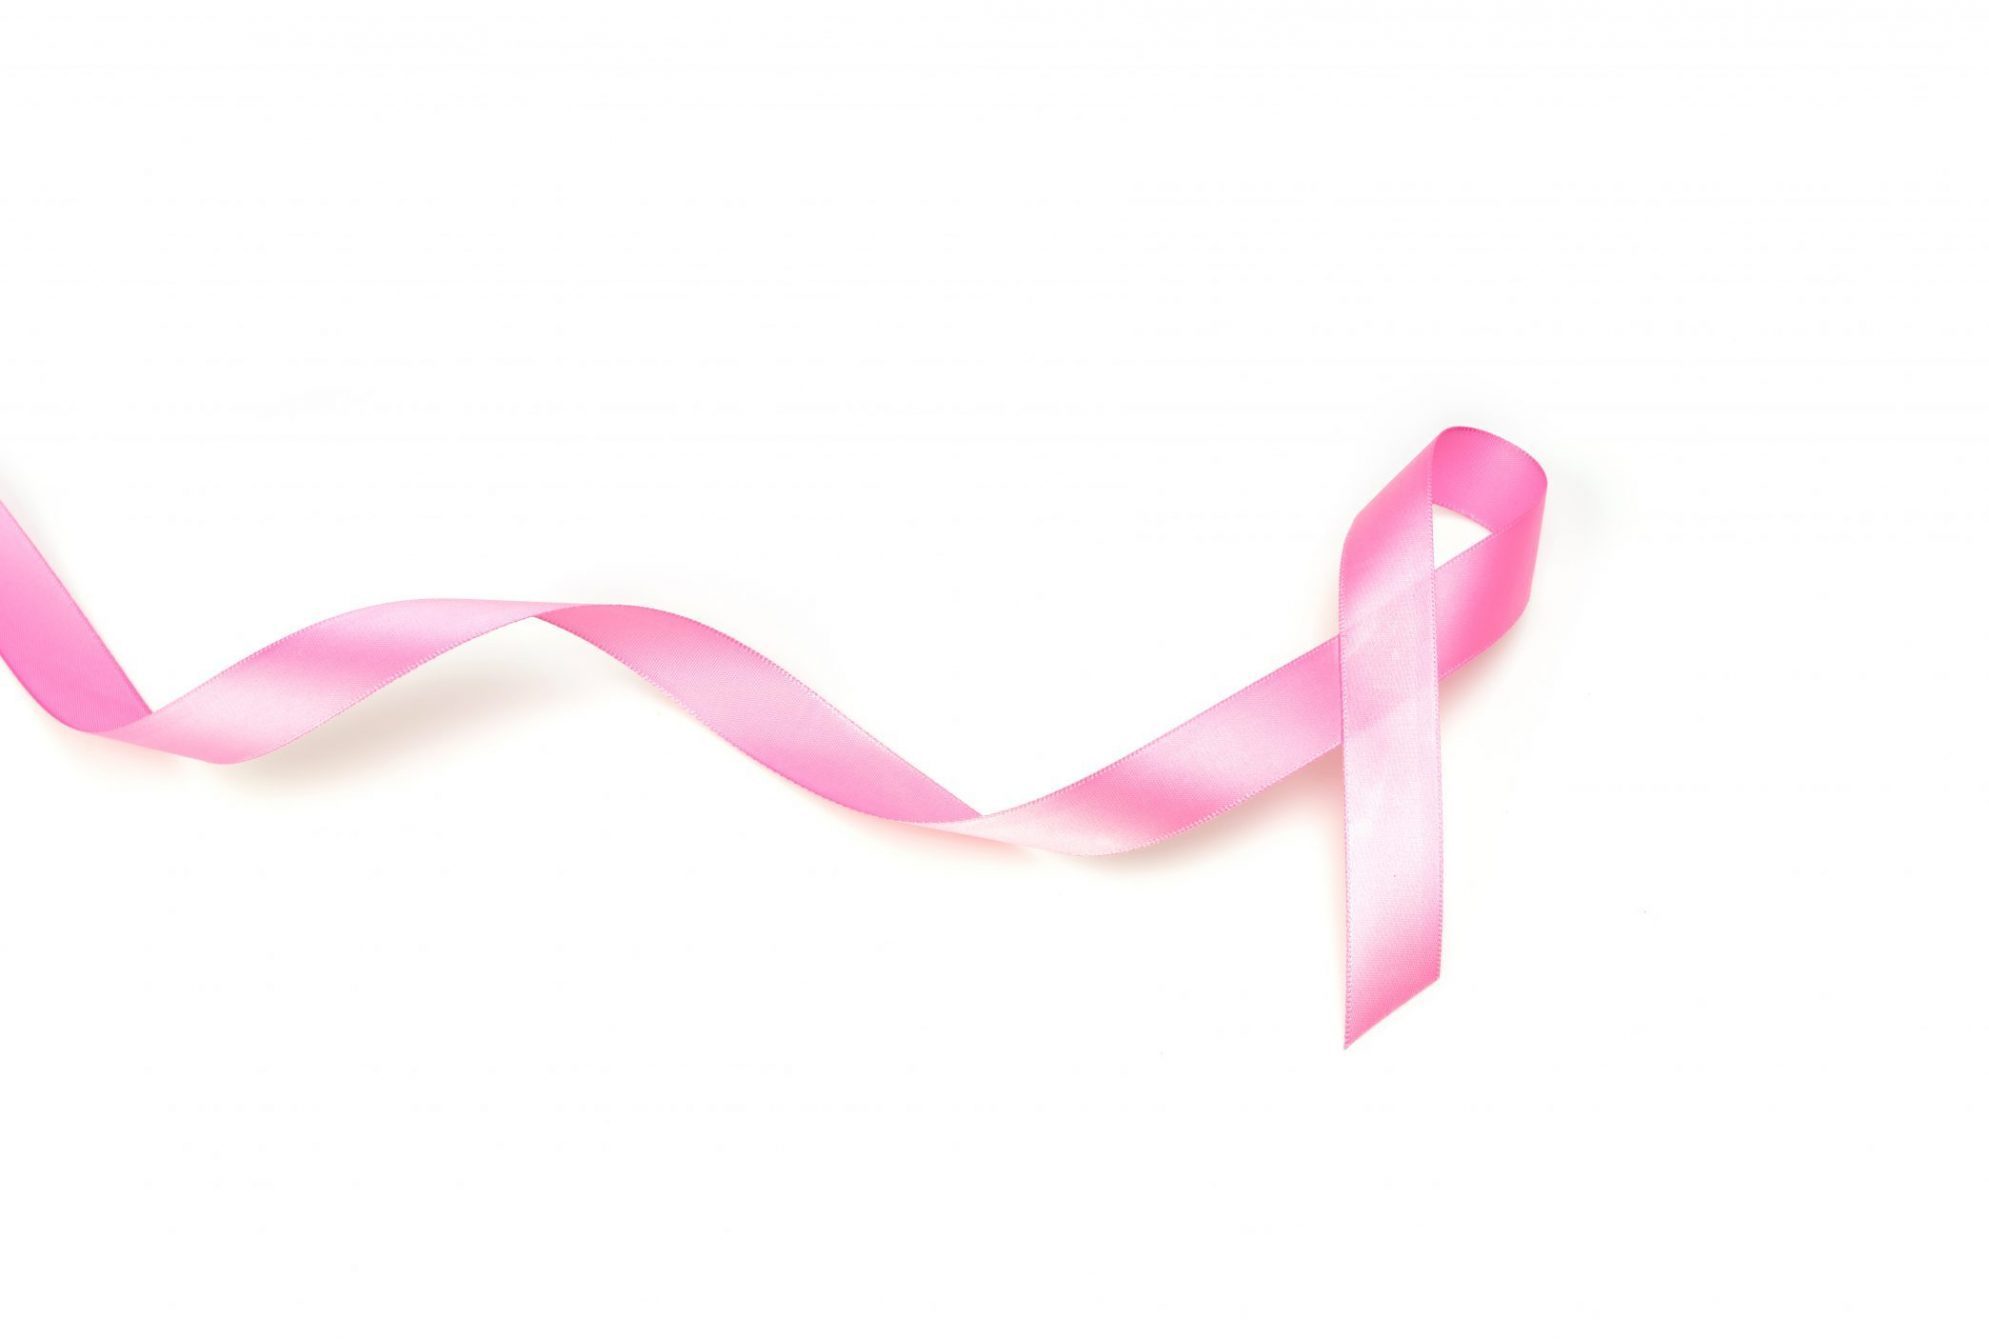 Case study of a woman with mastectomy for breast cancer